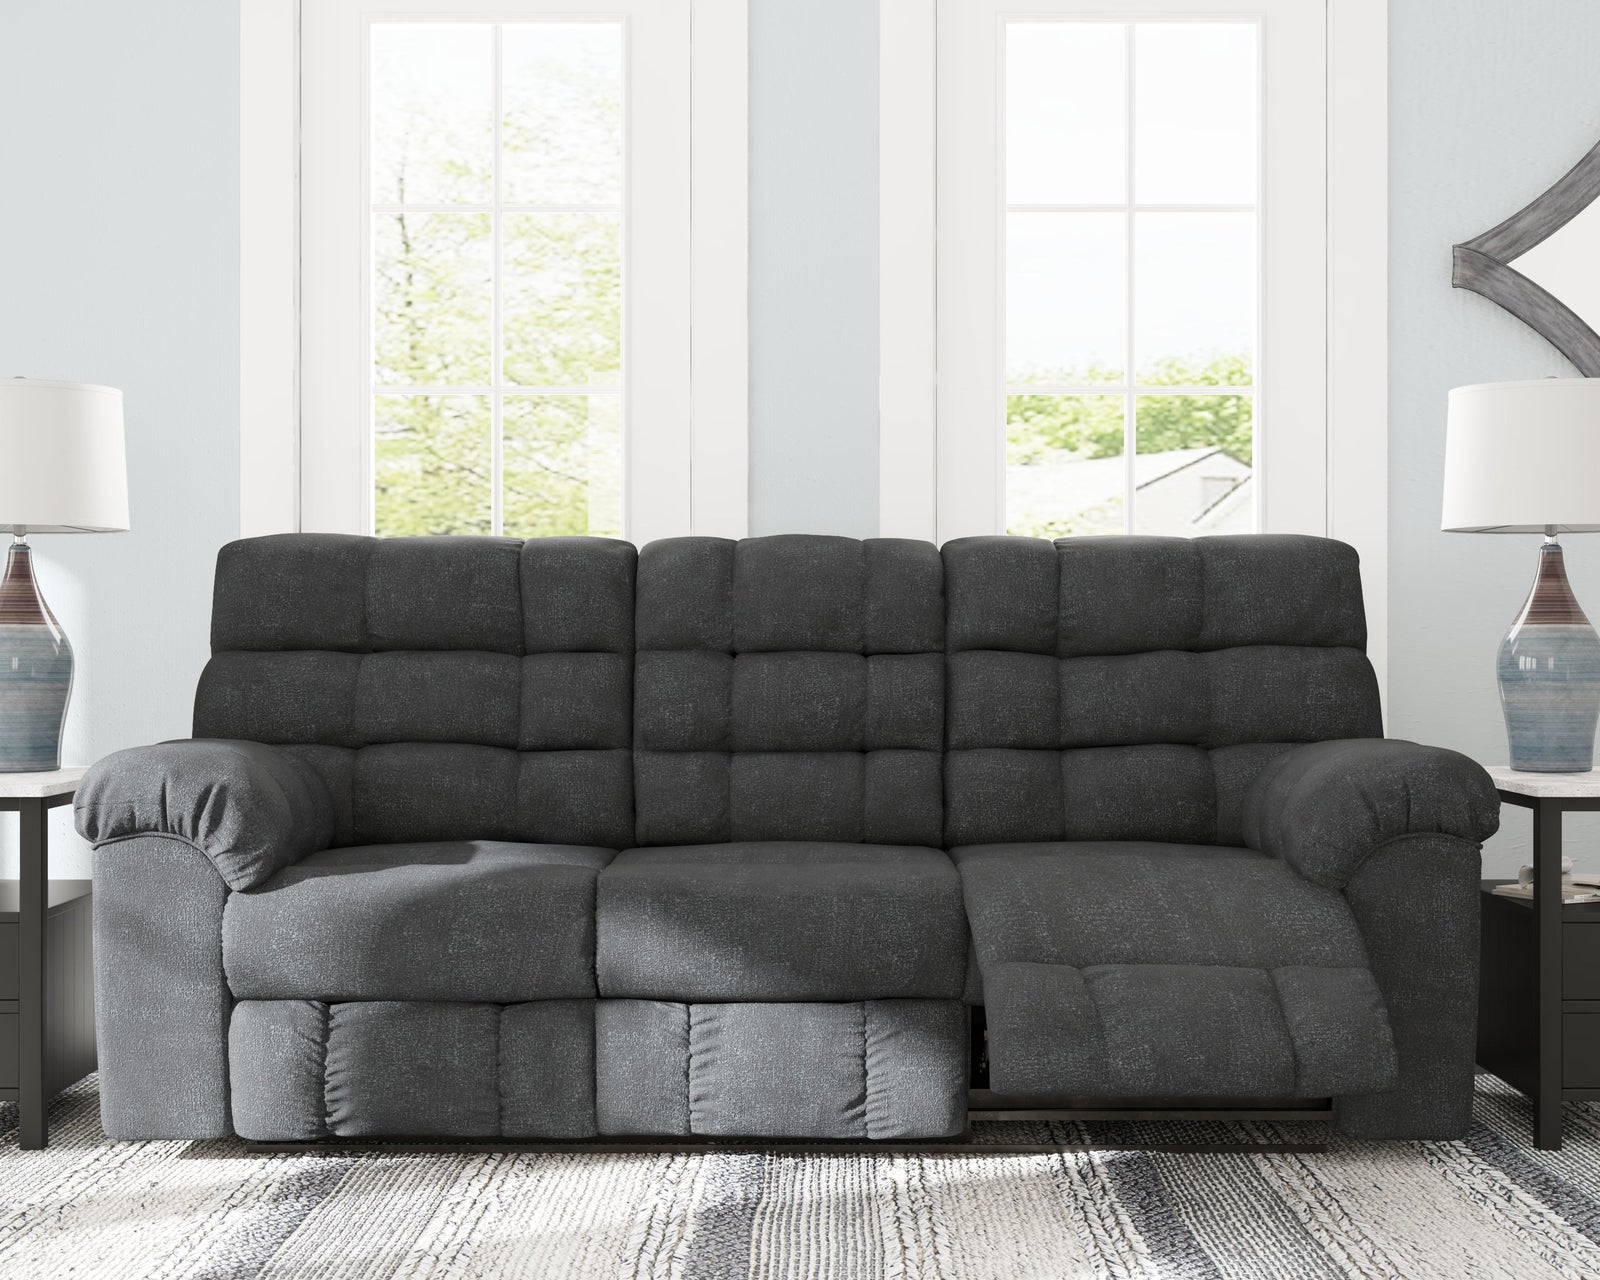 Wilhurst Marine Chenille Reclining Sofa With Drop Down Table